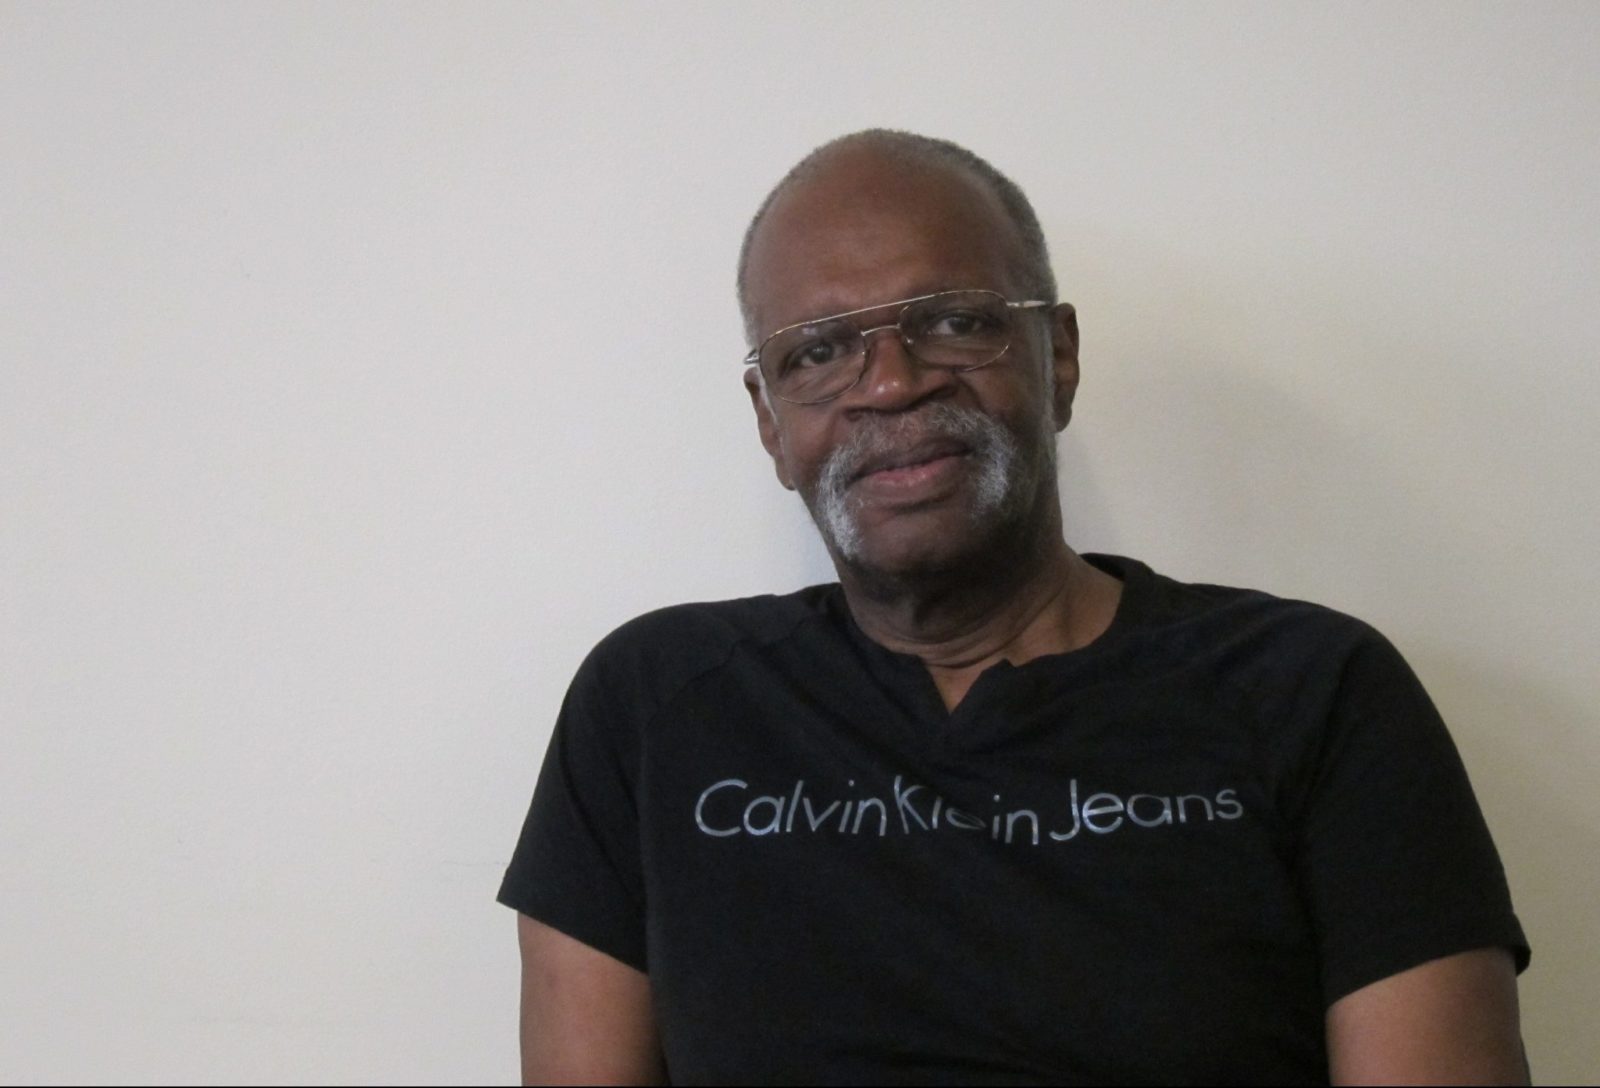 photo of Mr. Greg Francis, who is the subject of this article. Mr. Francis is an older African American man with close cropped hair, eye glasses, and a gray moustache. He is wearing a black t-shirt with what appears to be a Calvin Klein Jeans logo across the chest.